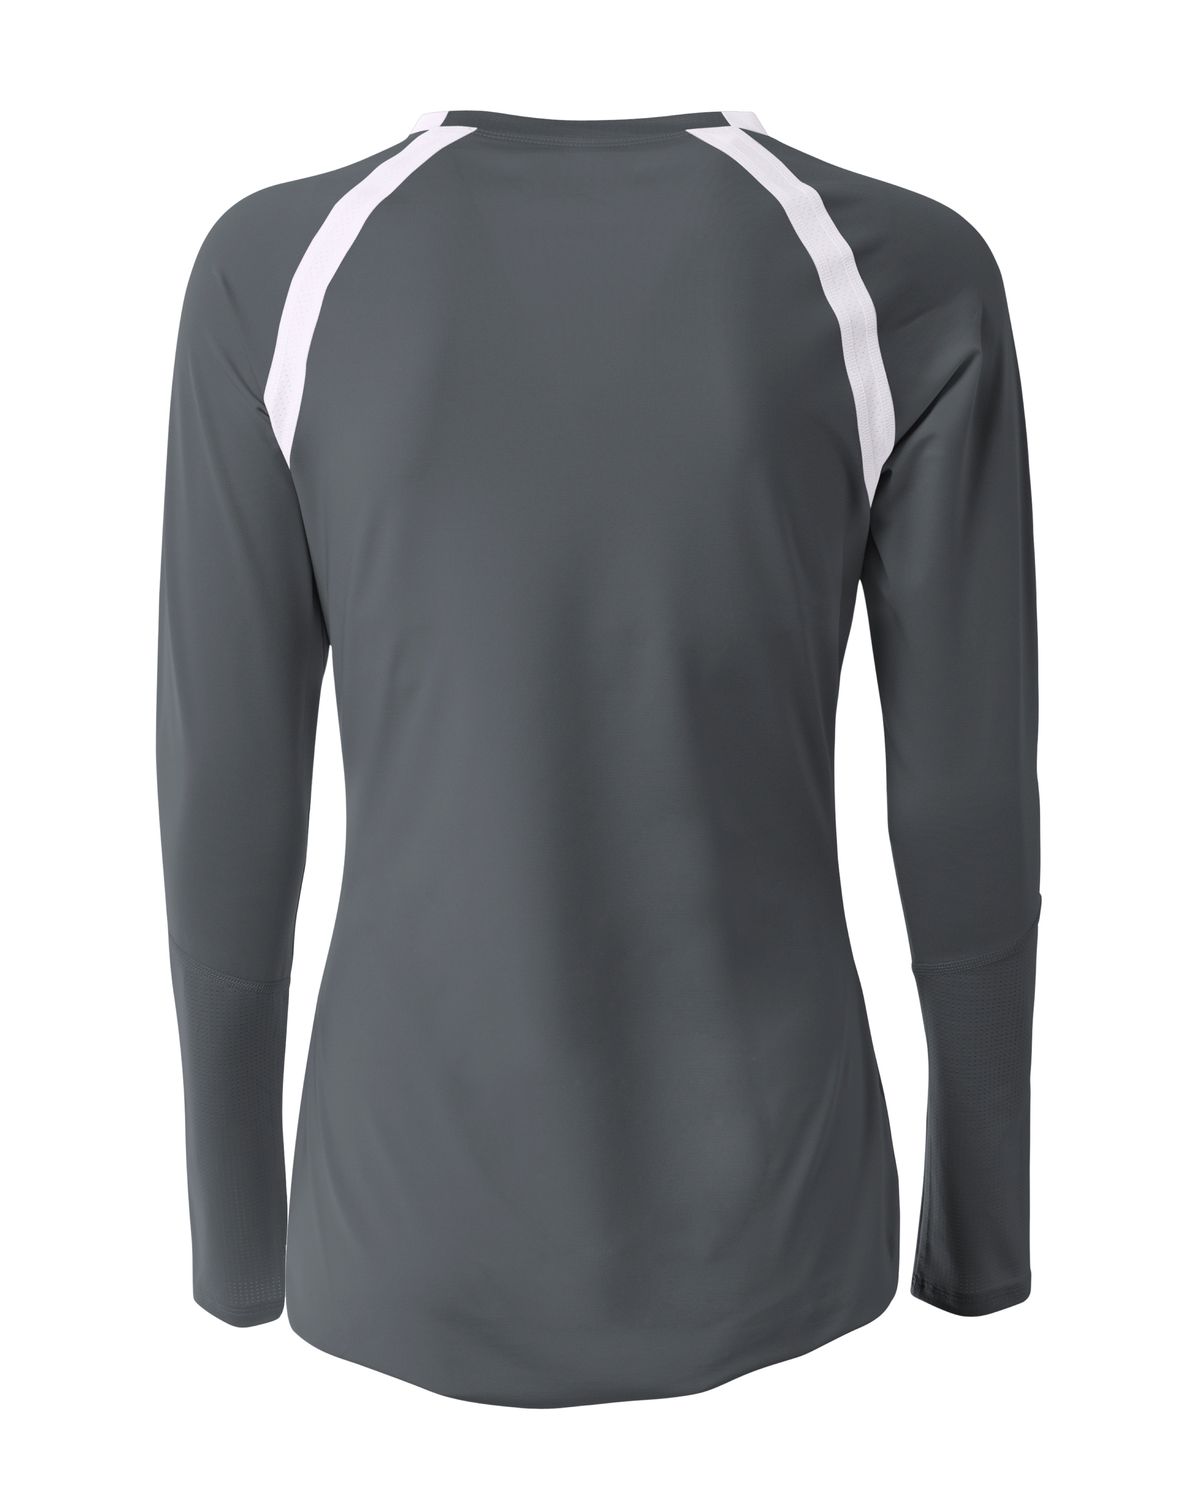 'A4 NW3020 Ace Long Sleeve Volleyball Jersey'